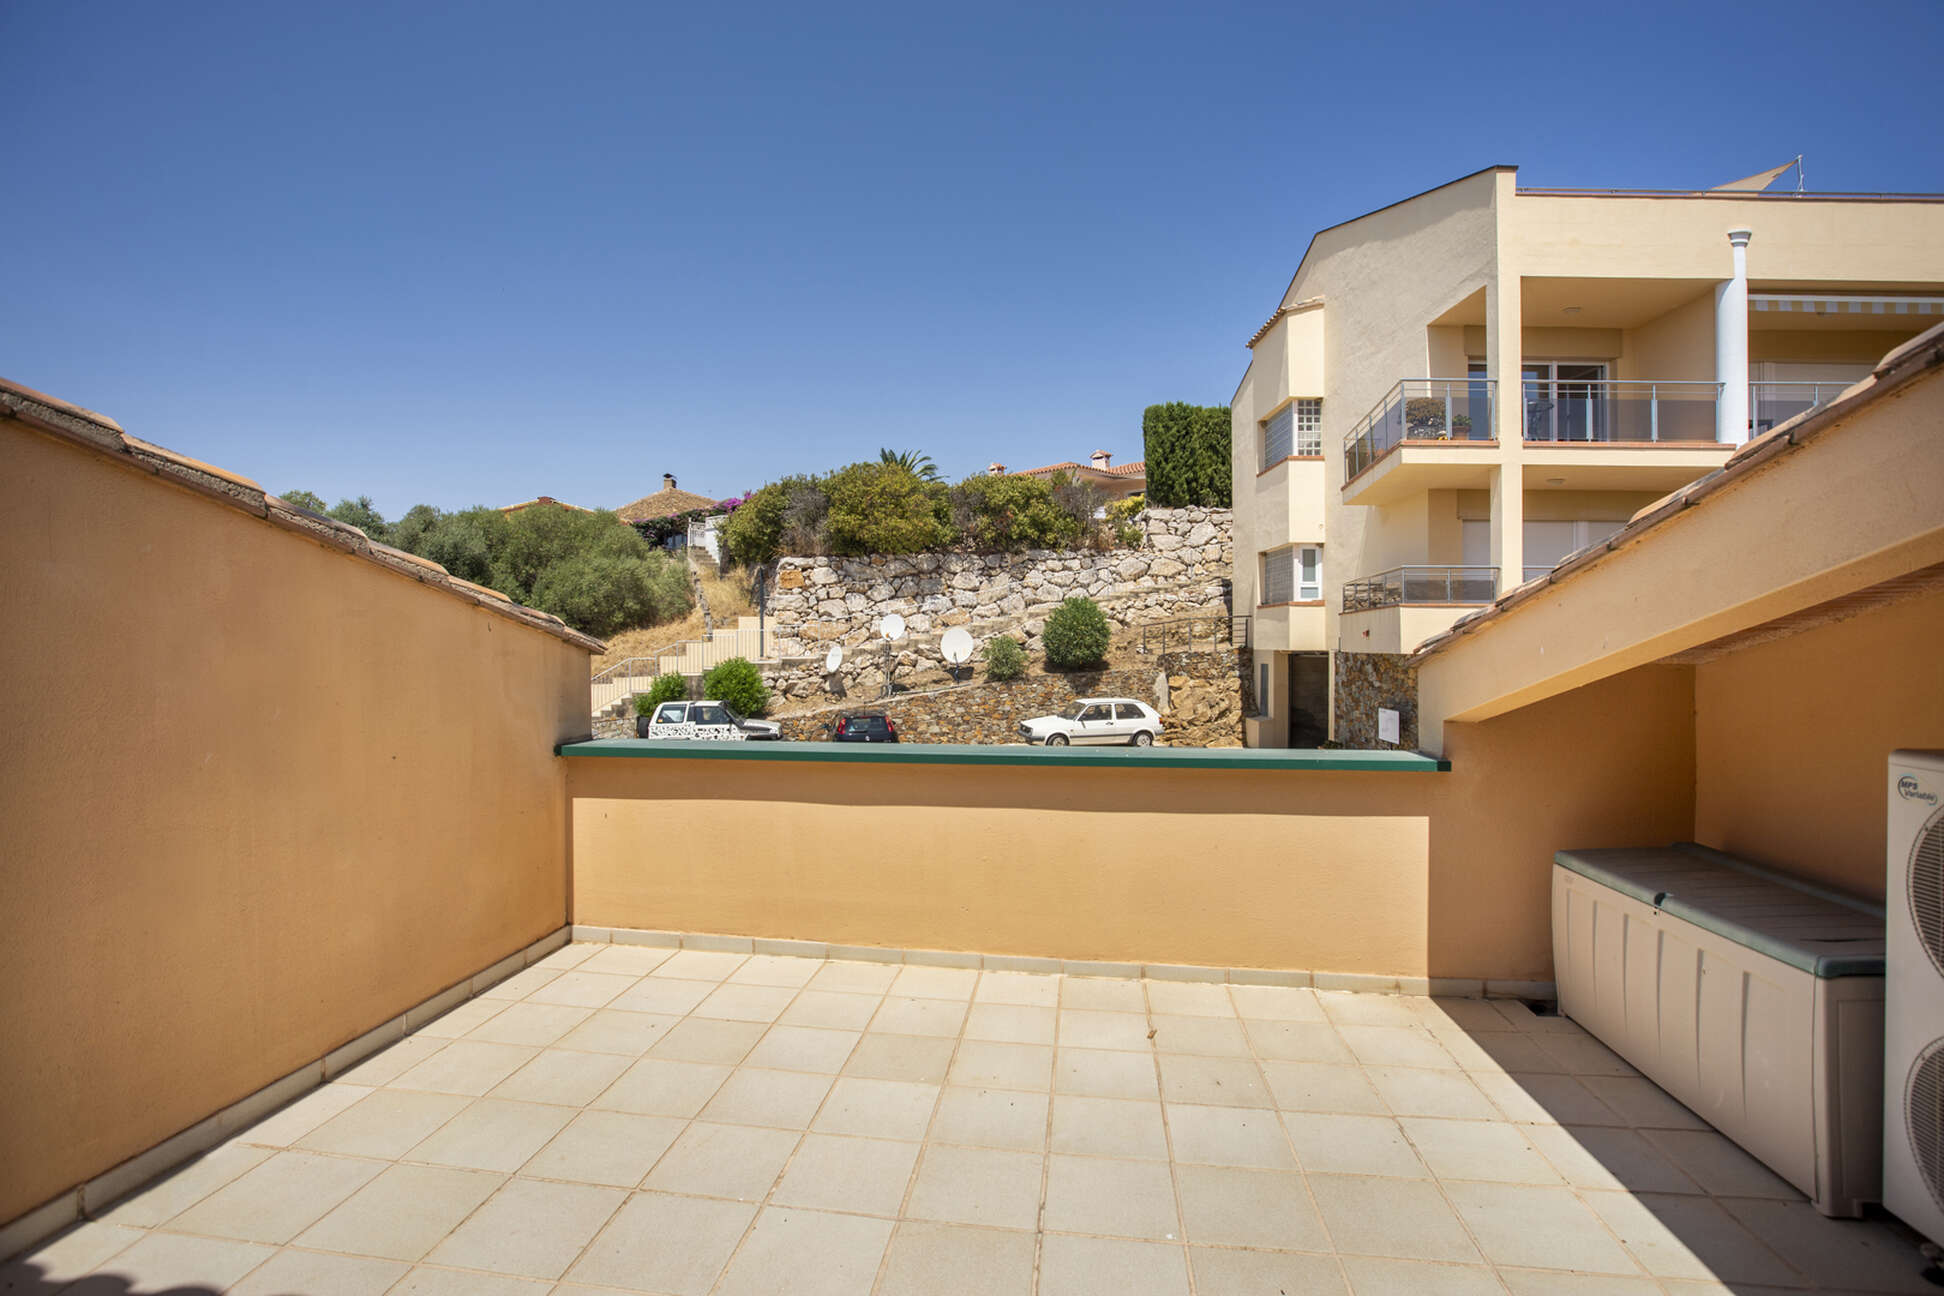 Fantastic duplex apartment for sale with views over the bay of Roses